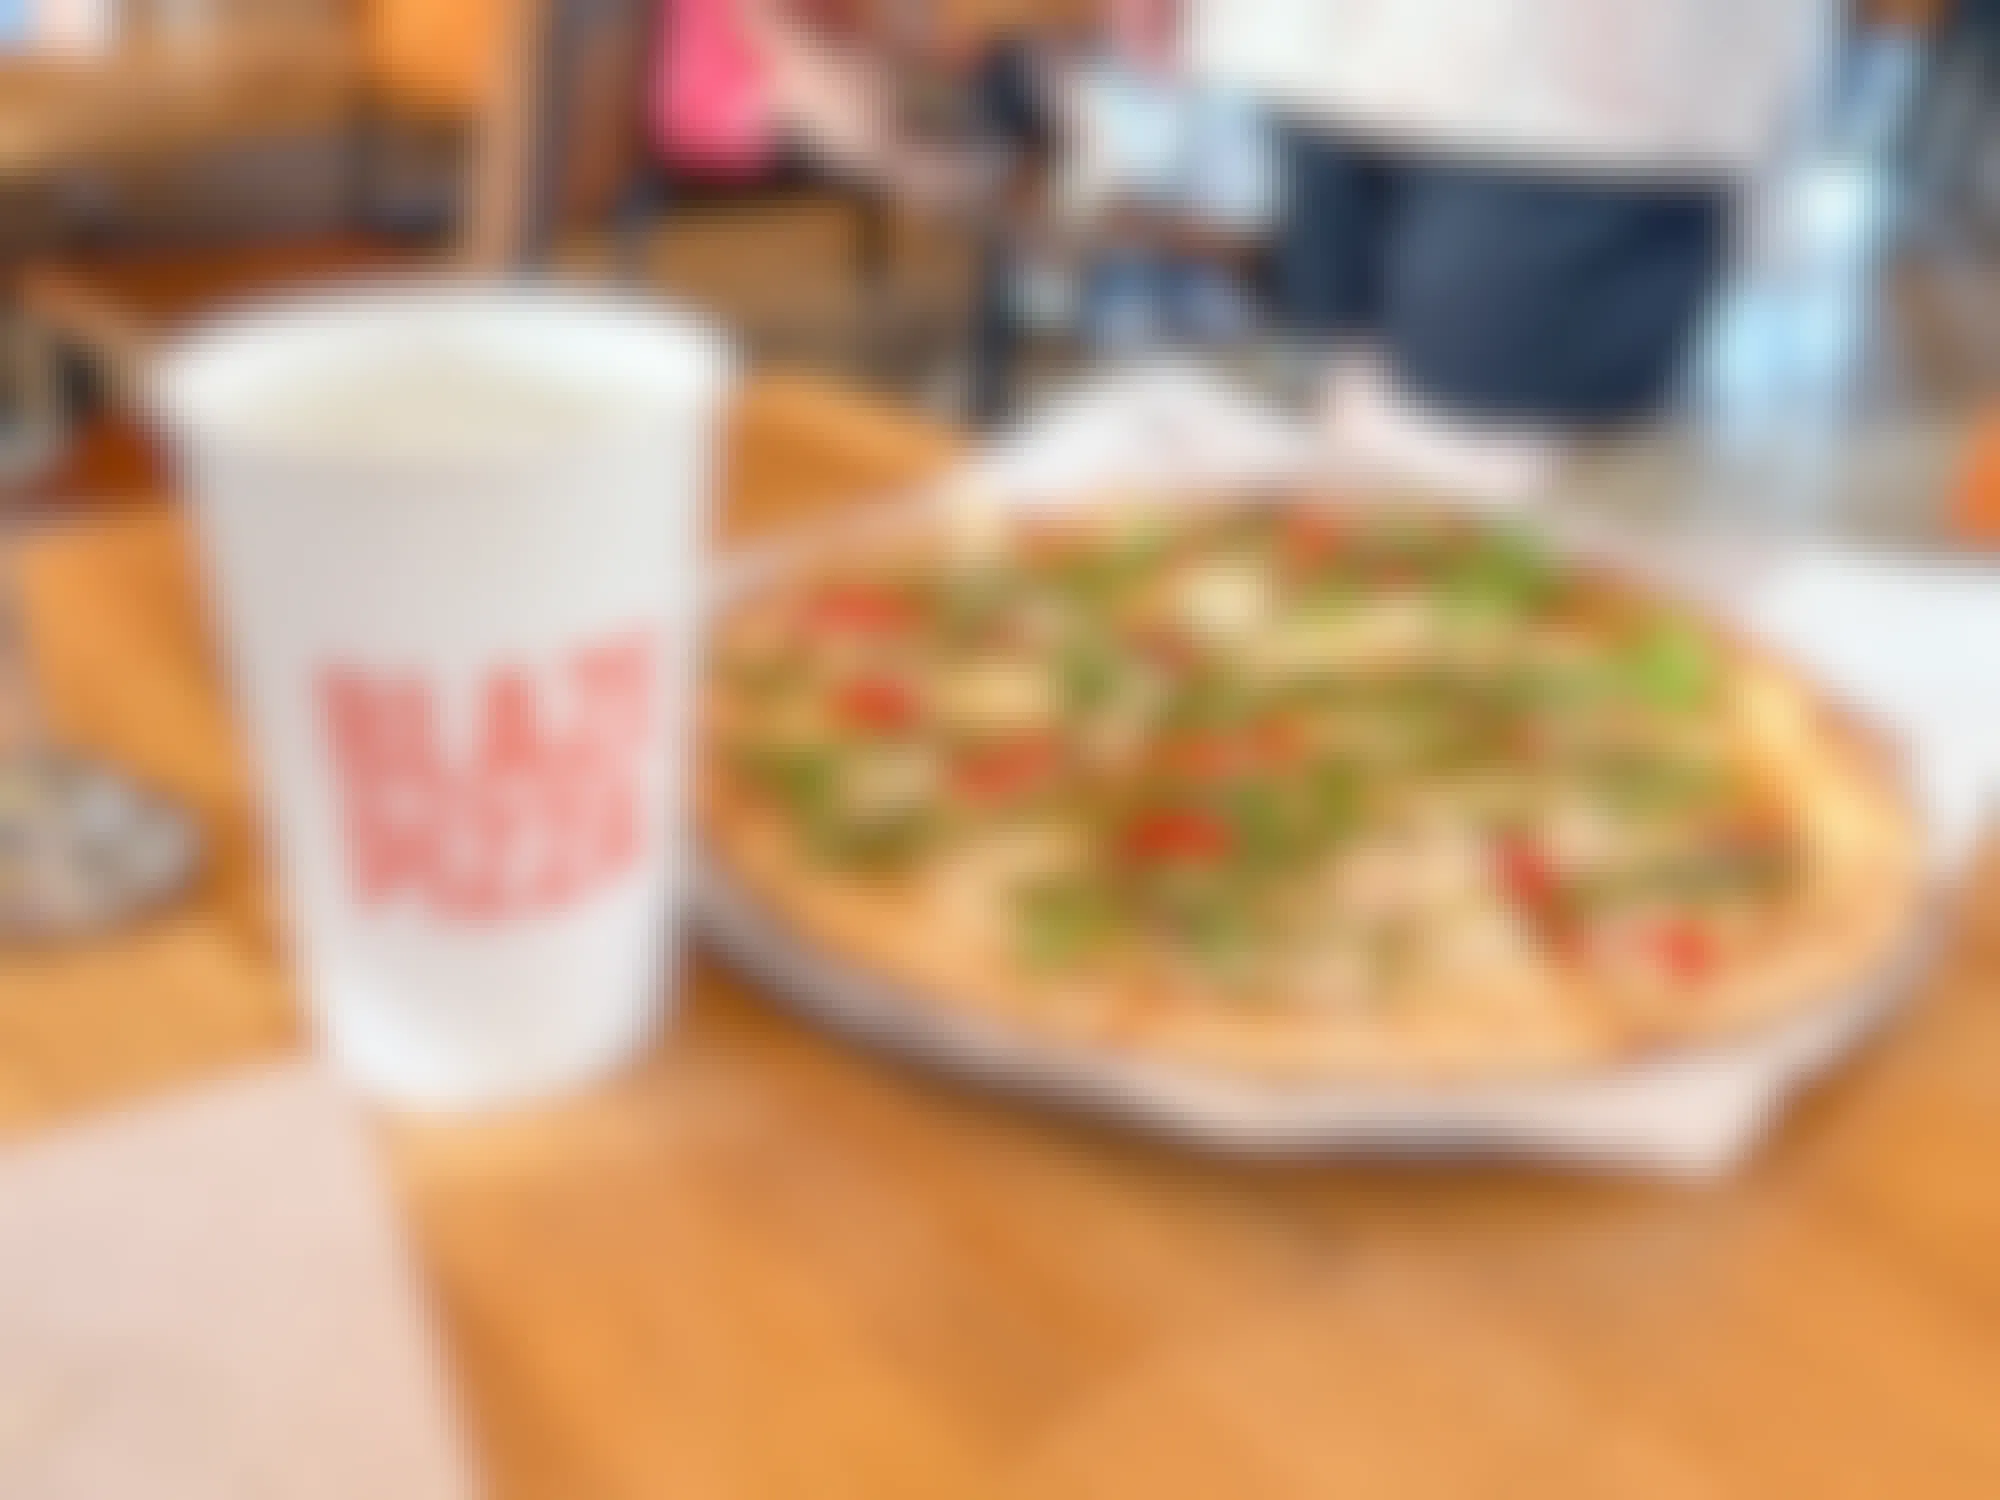 a pizza and drink on a table at Blaze Pizza